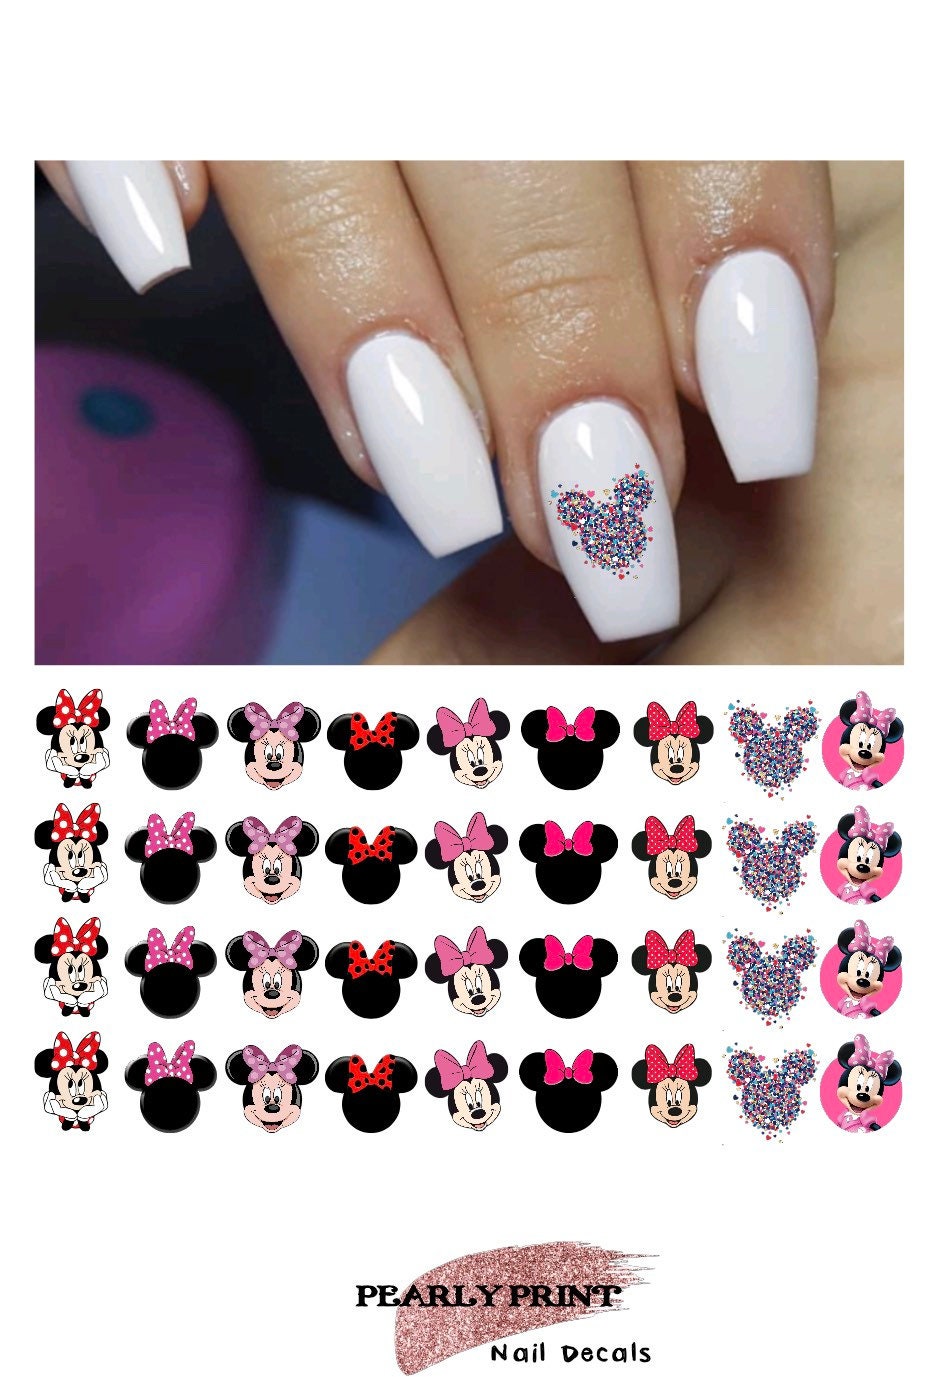 $5.63 - Minnie Mouse Disney nail transfers - illustrated nail art decals -  MInnie Disney nail stickers…